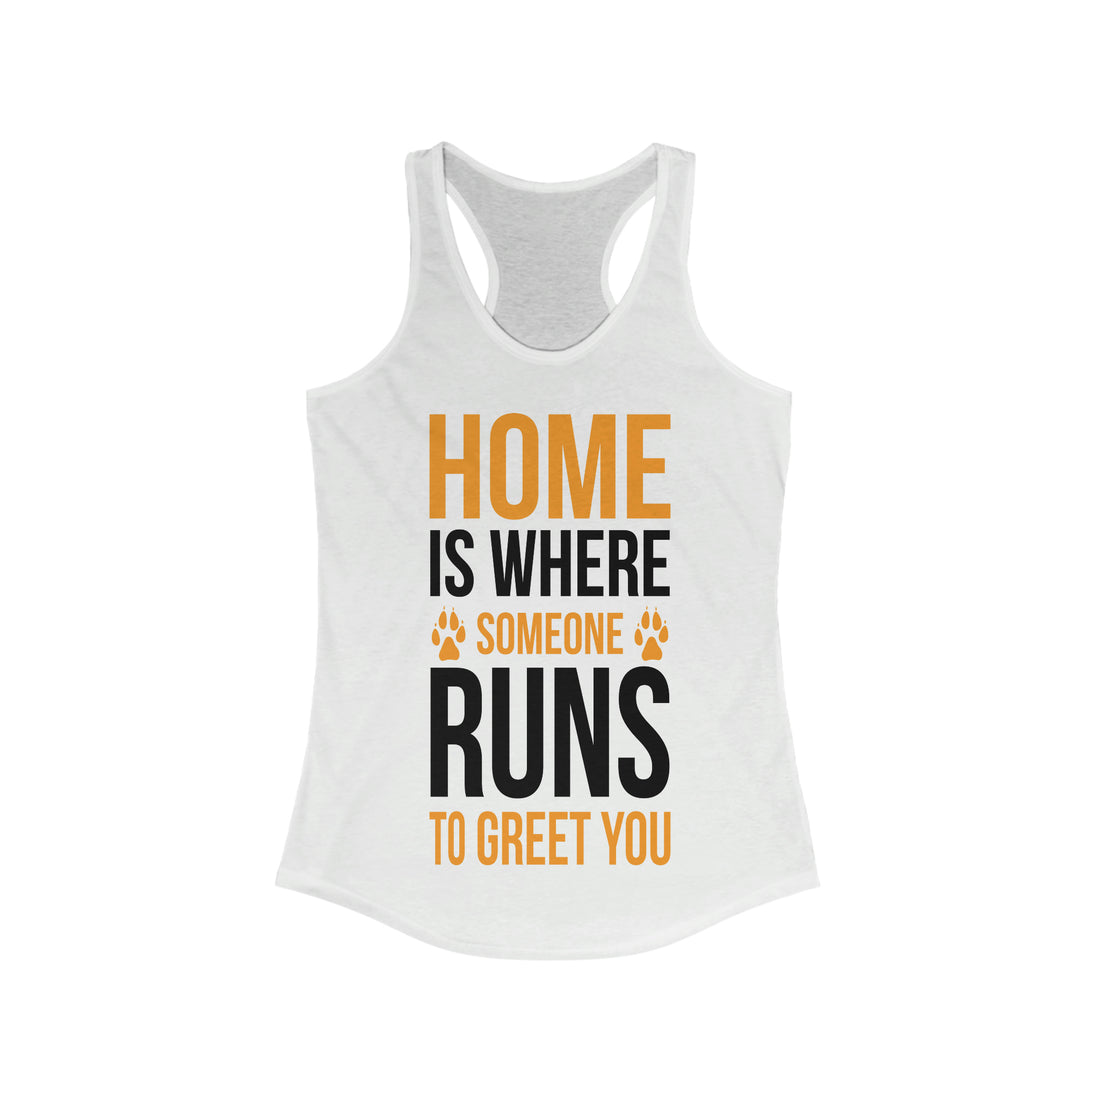 Home Is Where Someone Runs To Greet You - Racerback Tank Top